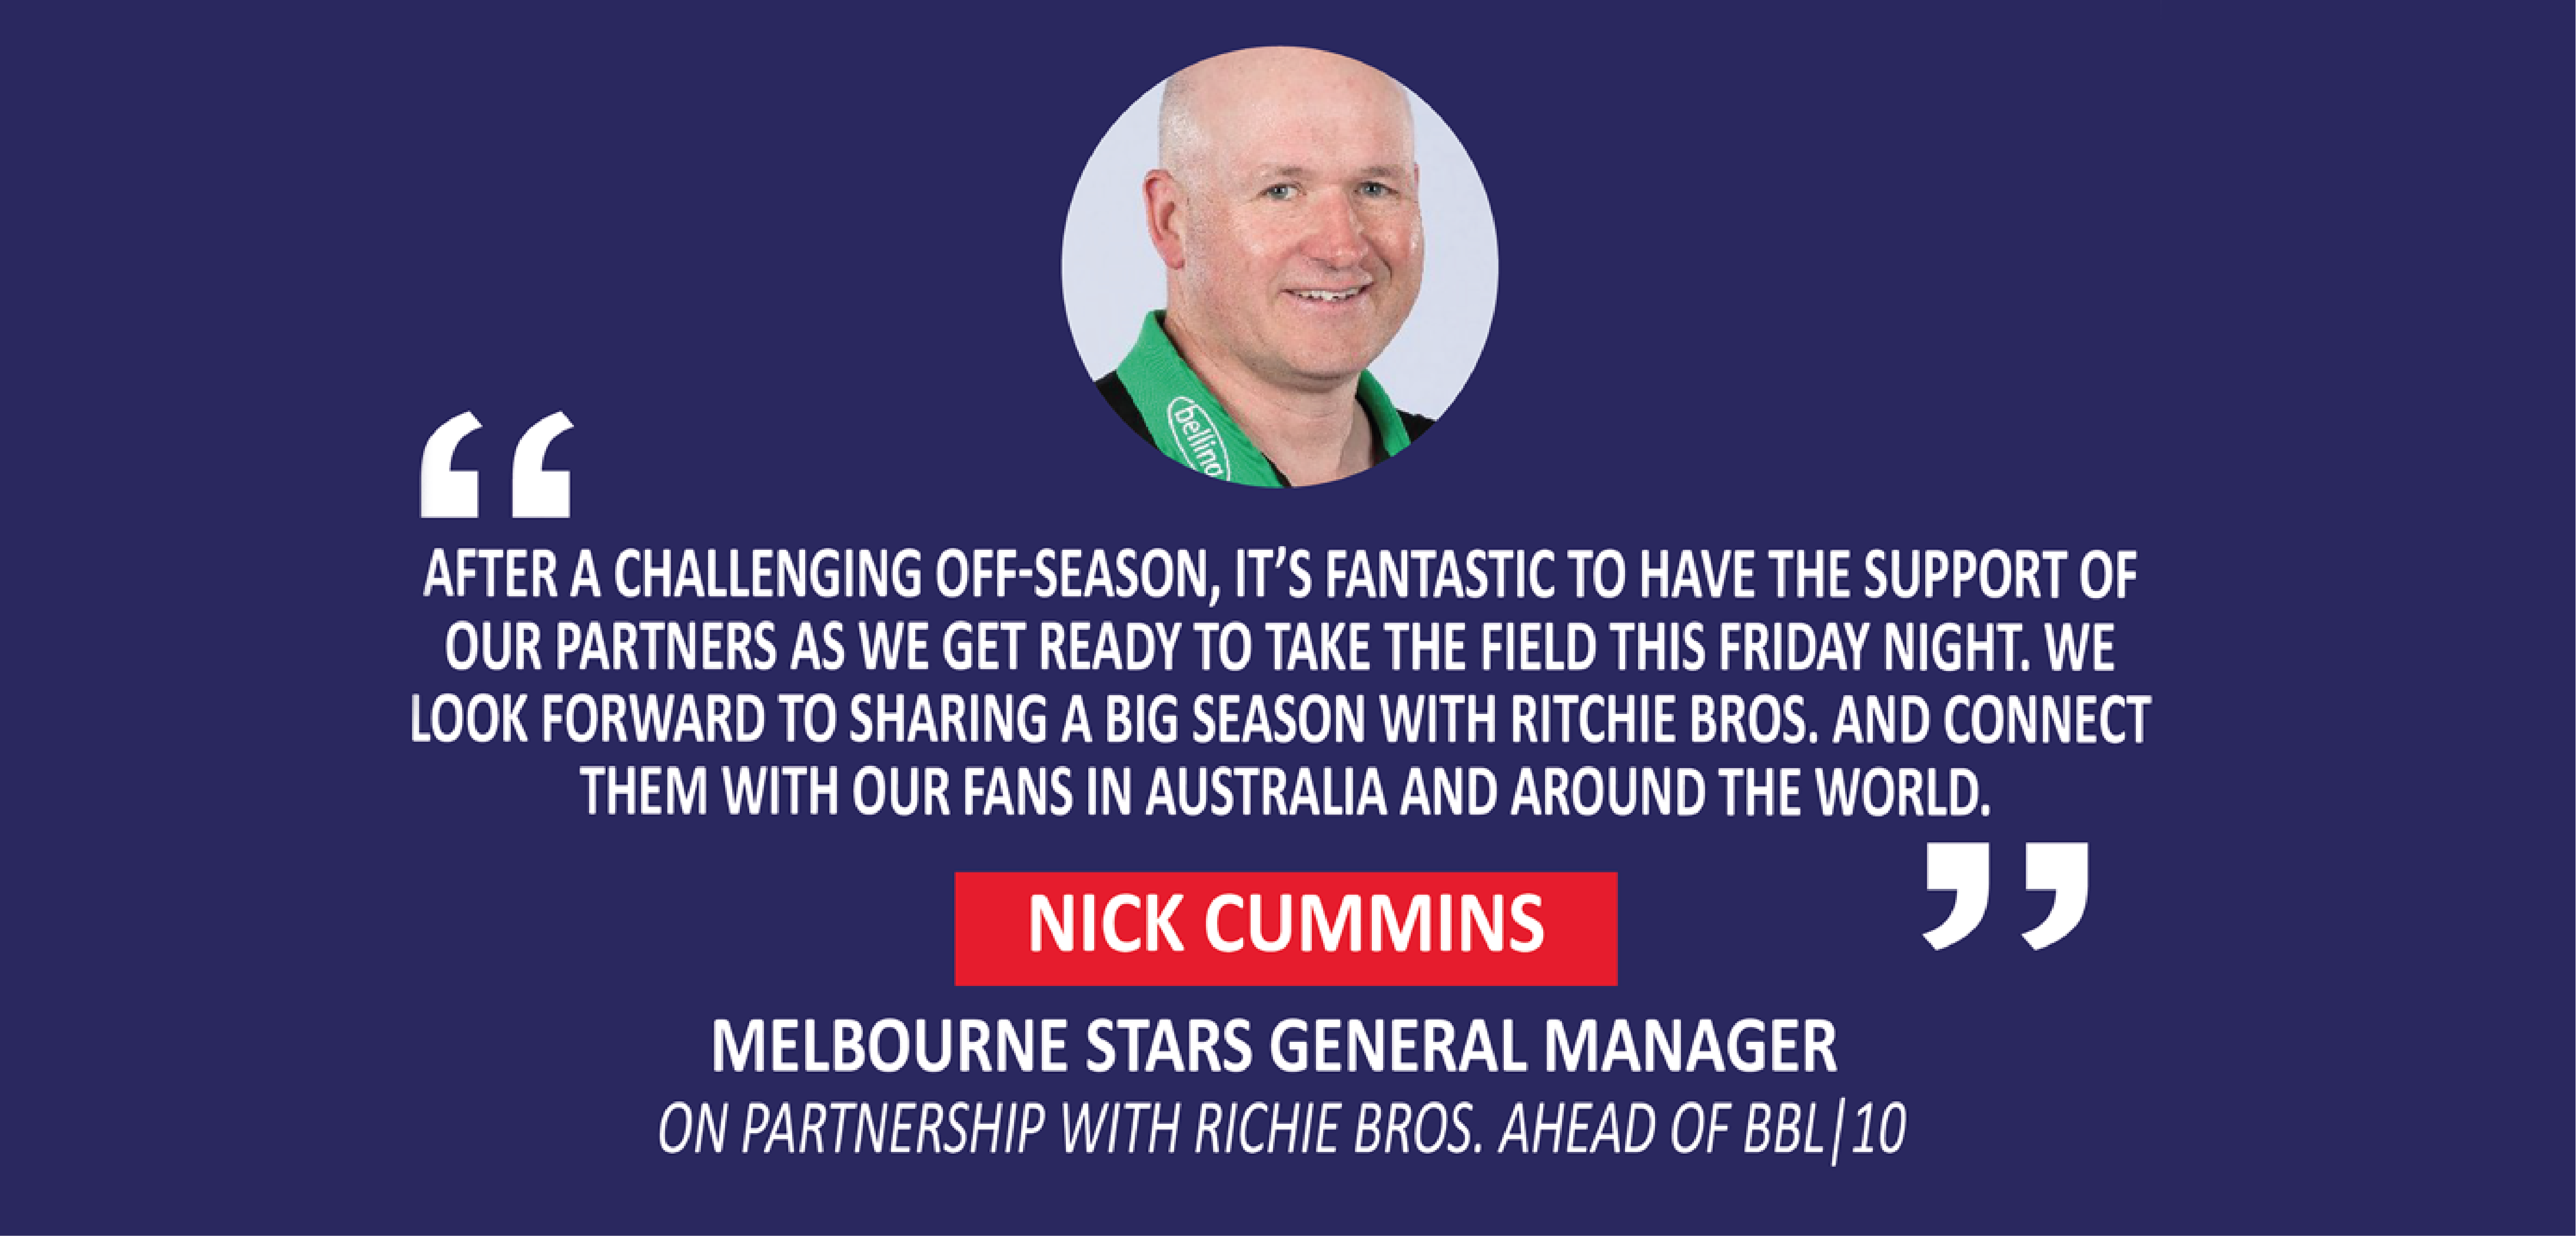 Nick Cummins, Melbourne Stars General Manager on partnership with Richie Bros. ahead of BBL|10